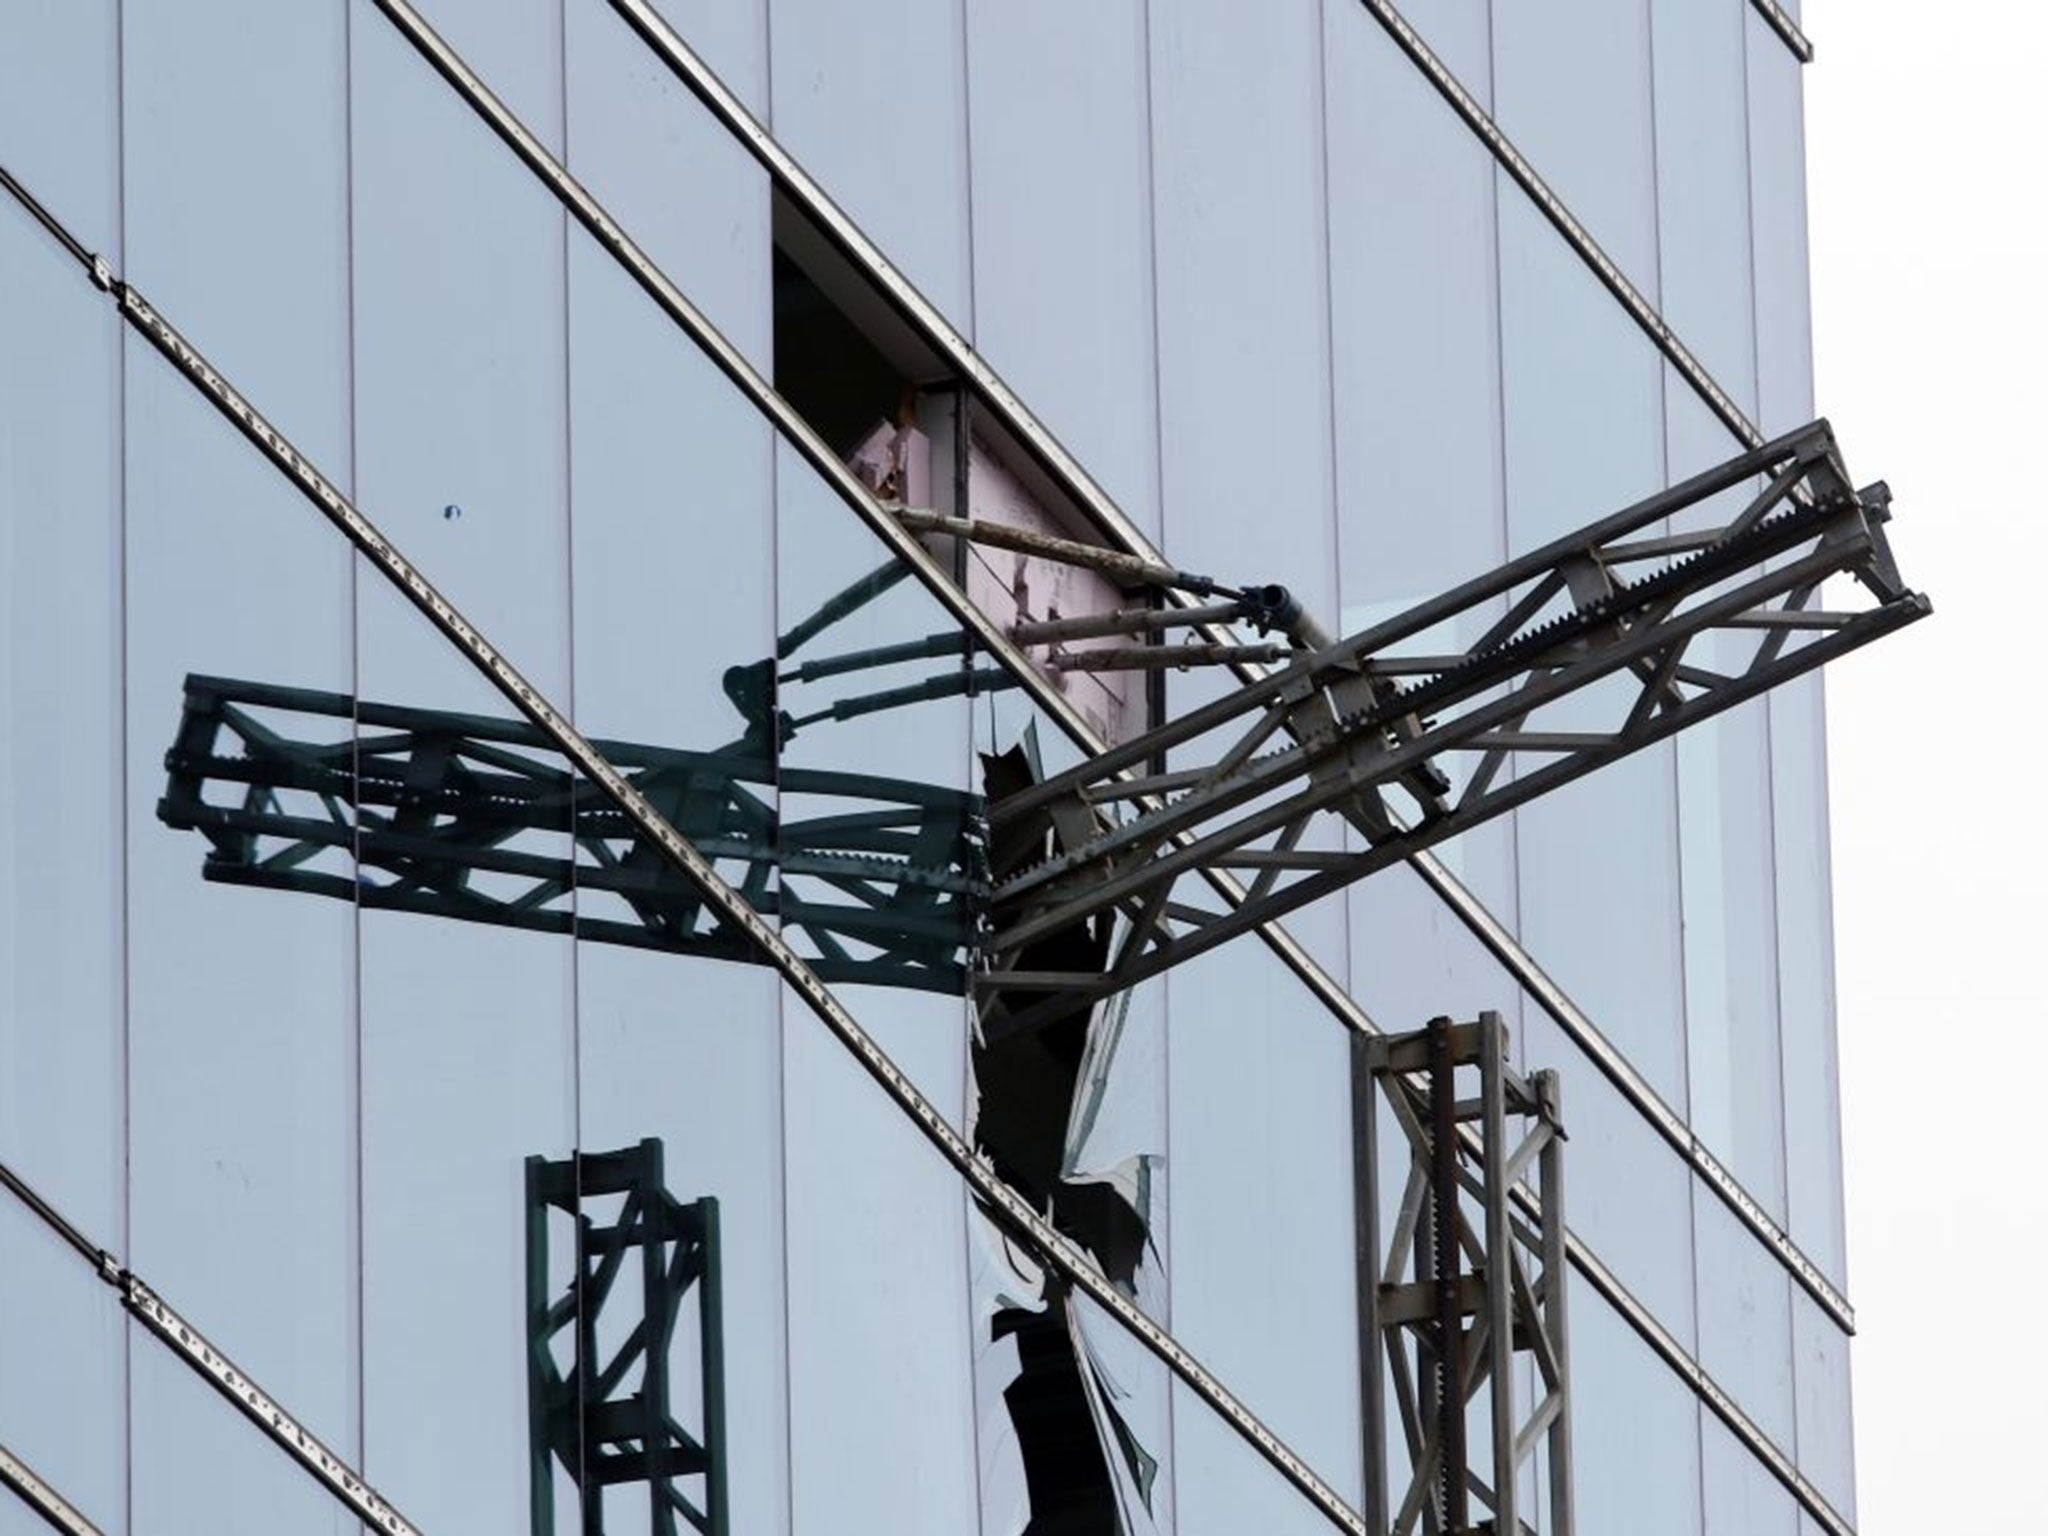 A section of scaffolding protrudes from a shattered window at the scene of a construction accident that killed three people and sent another to a hospital, Monday, March 23, 2015, in Raleigh, N.C. A scaffolding holding at least three workers fell and cra